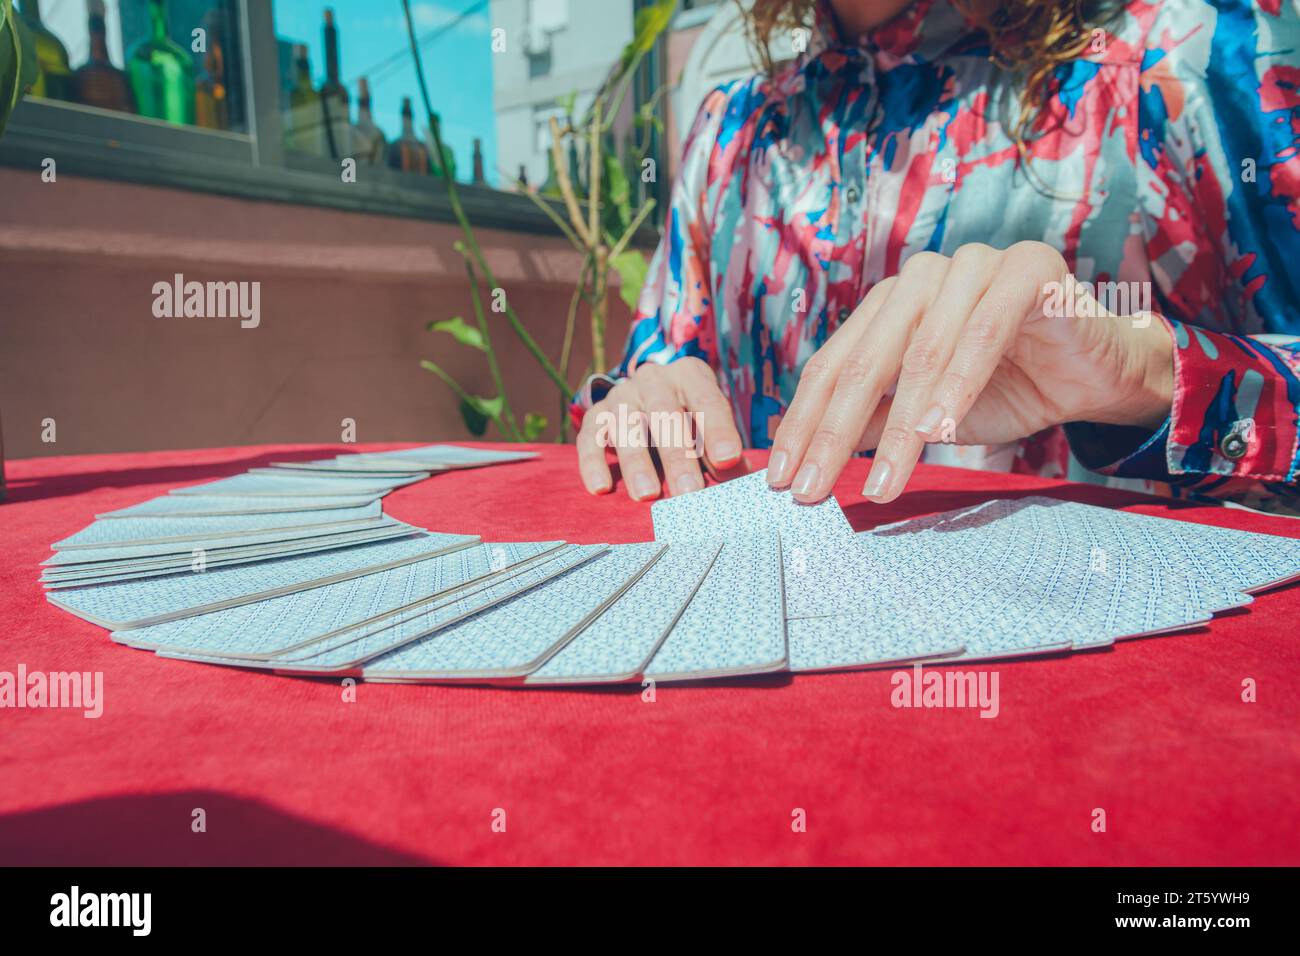 Caucasian Argentinian woman tarot reader, sitting taking card from fan-shaped deck on table, starting therapeutic tarot therapy. copy space. Stock Photo